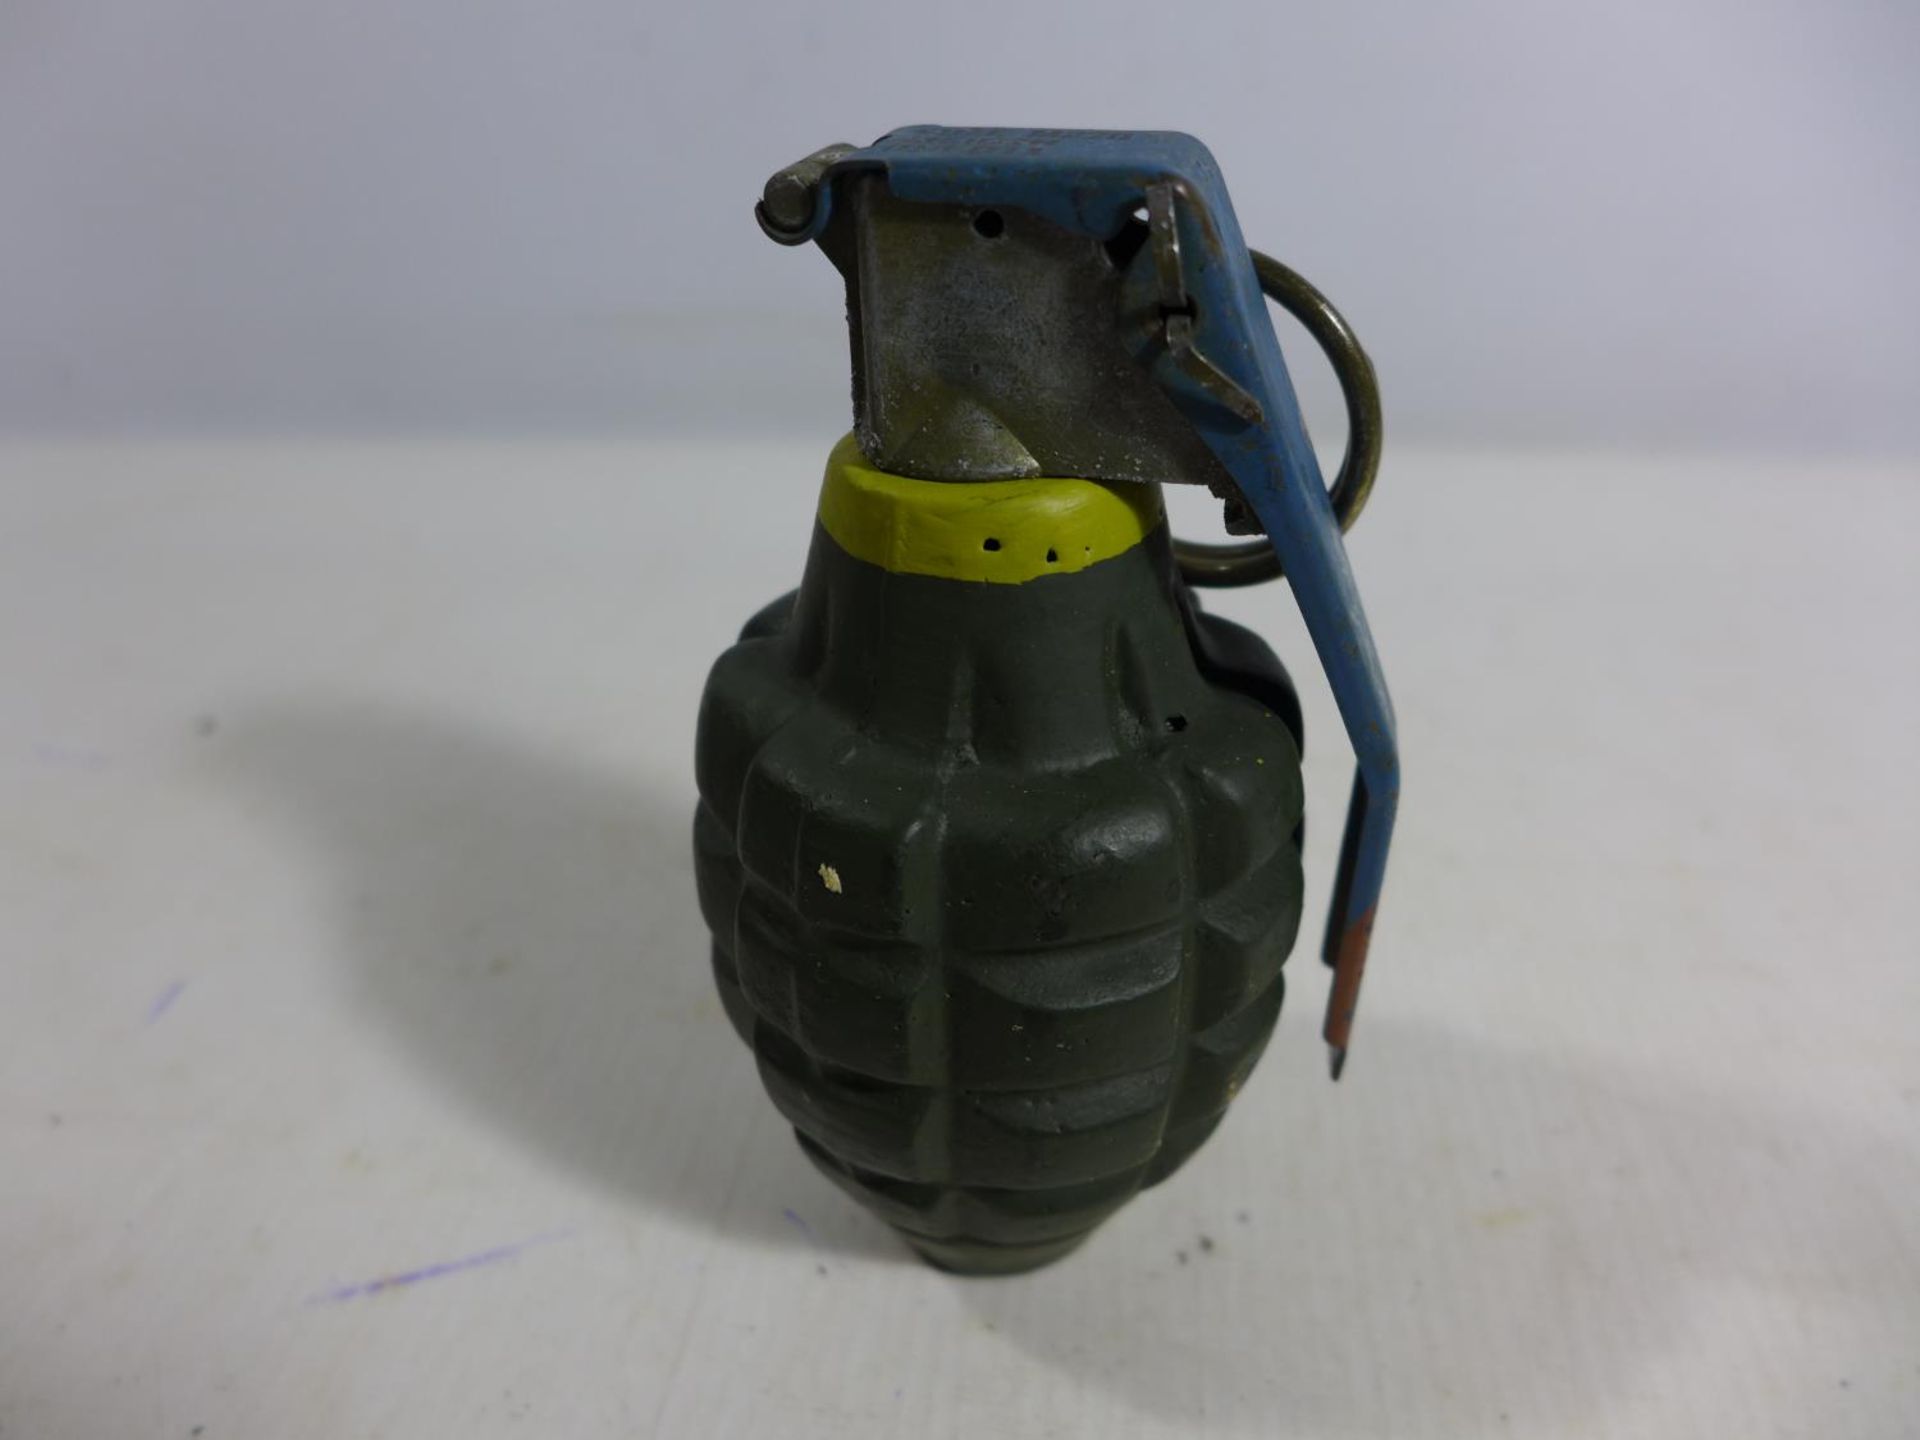 A MID 20TH CENTURY 'PINEAPPLE' PRACTICE GRENADE - Image 2 of 3